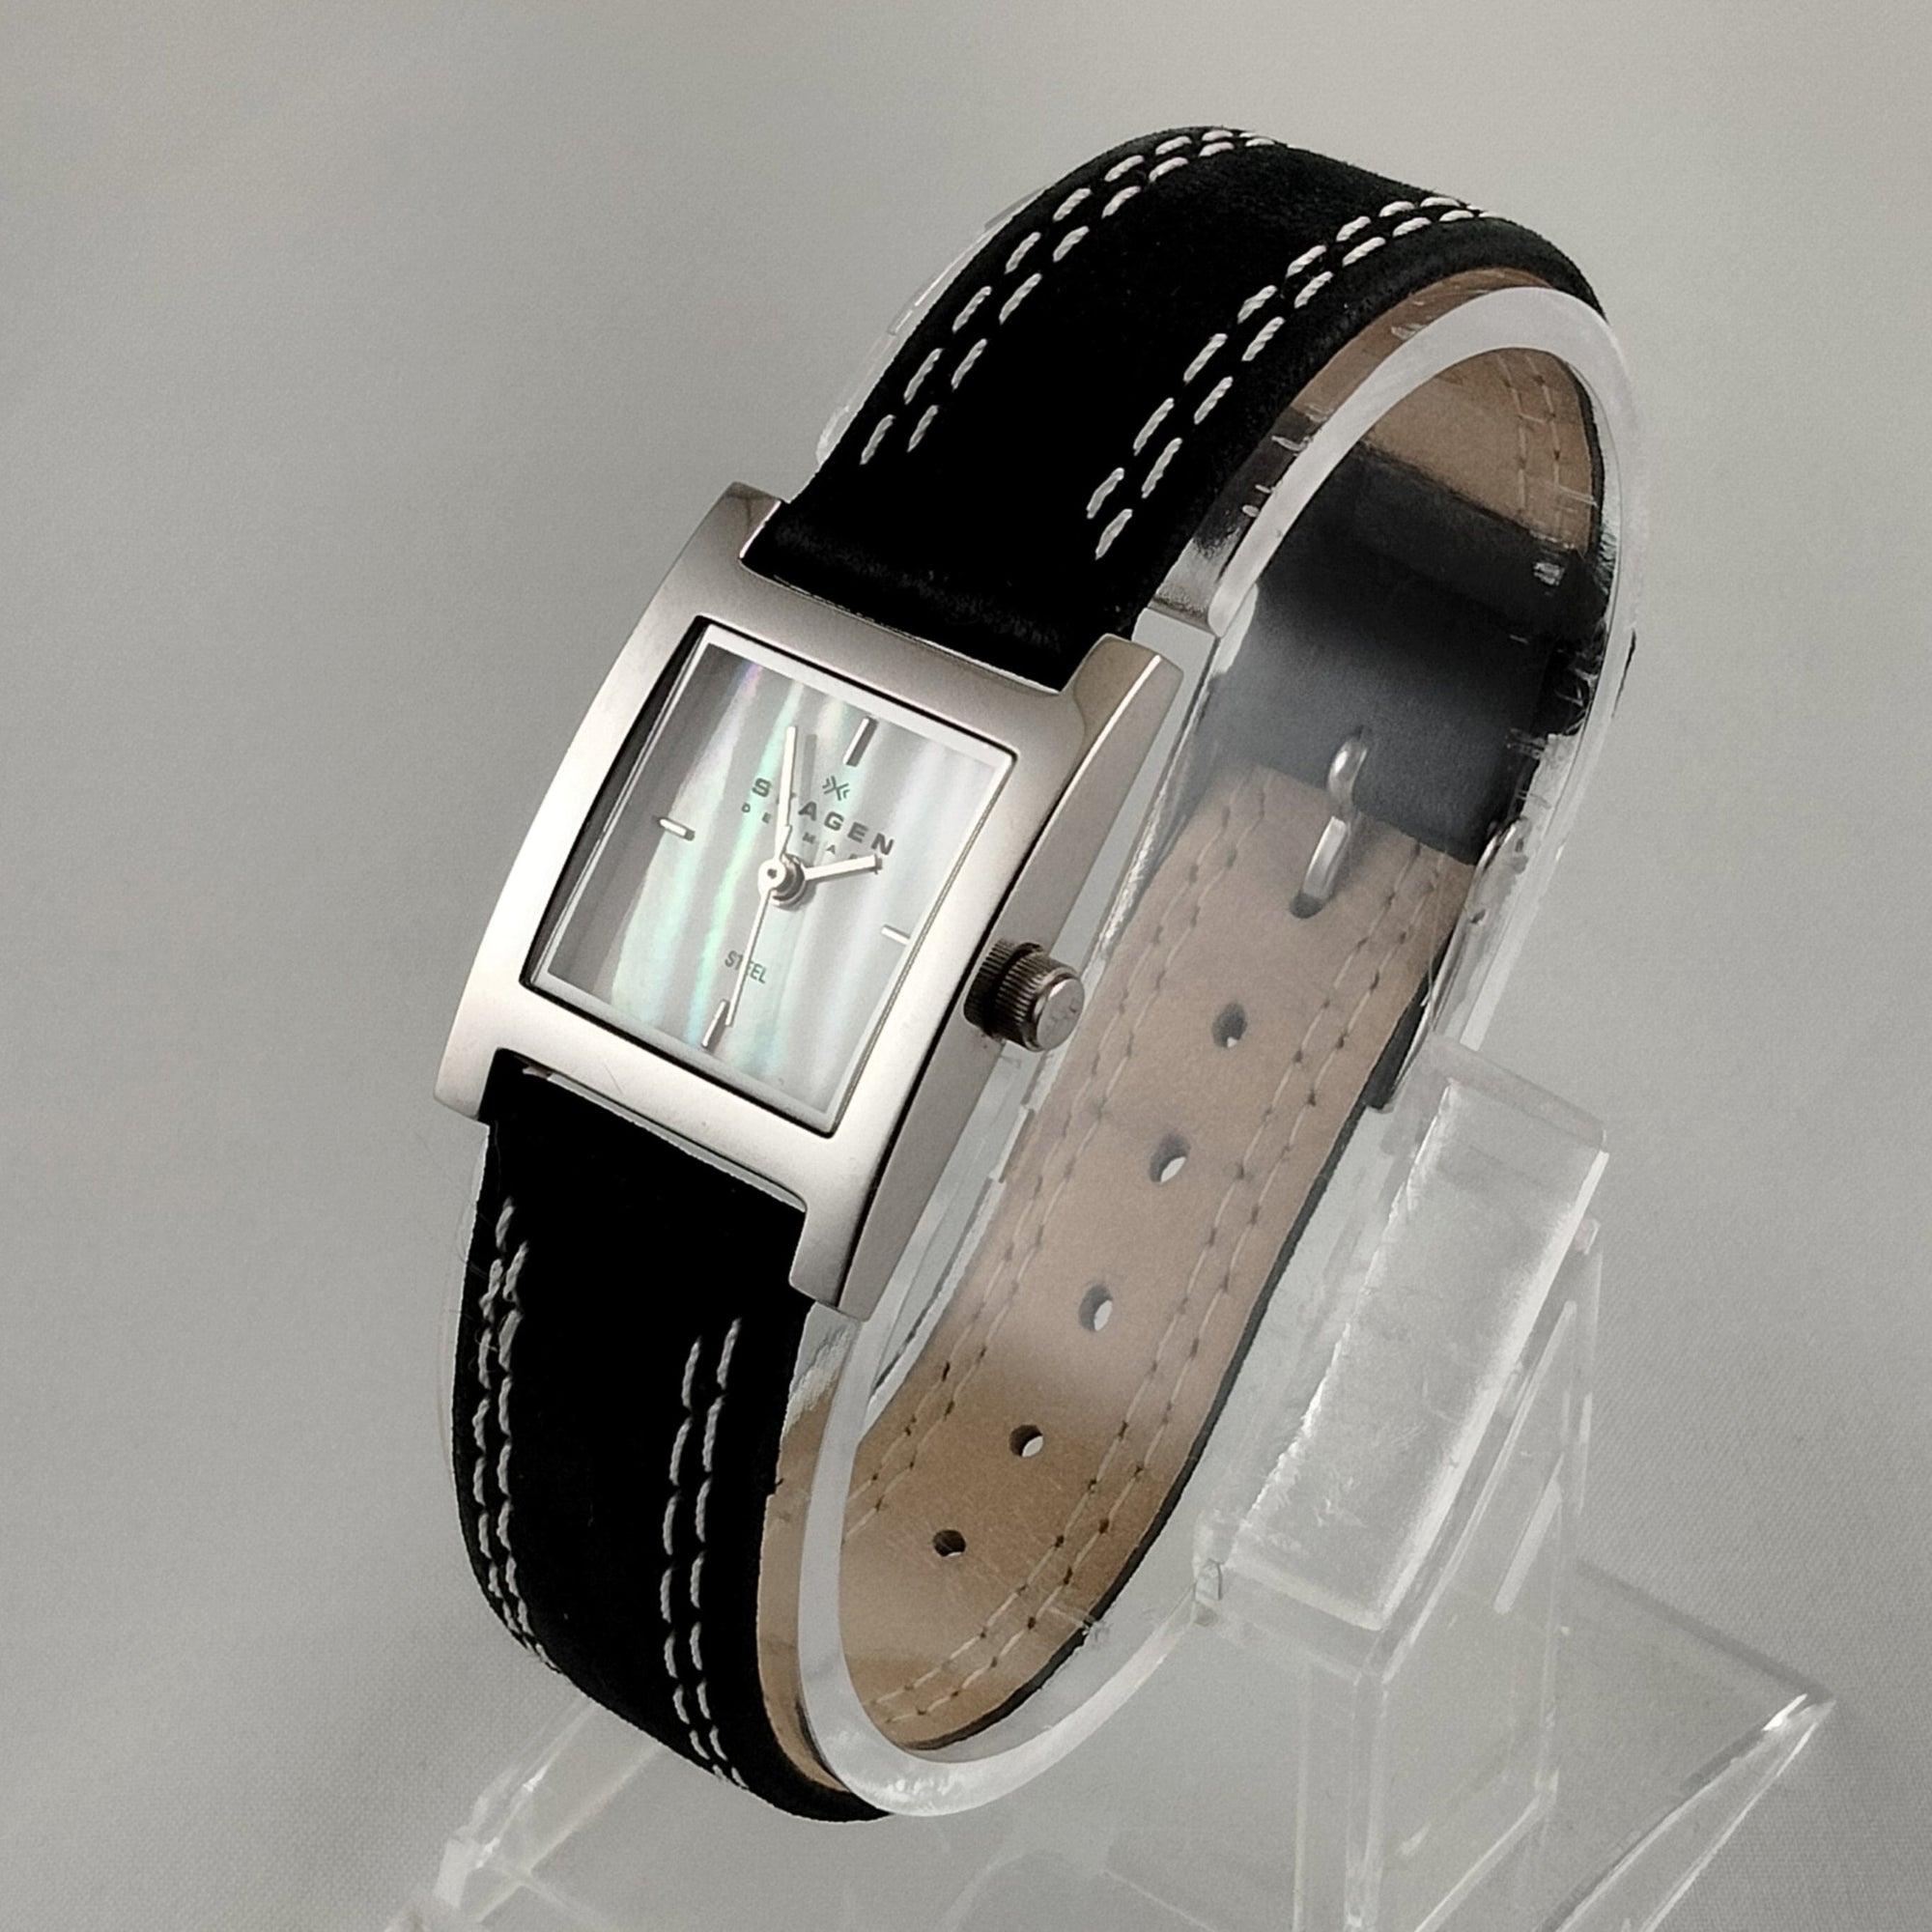 I Like Mikes Mid Century Modern Watches Skagen Unisex Stainless Steel Square Watch, Mother of Pearl Dial, Black Suede Strap with White Stitching